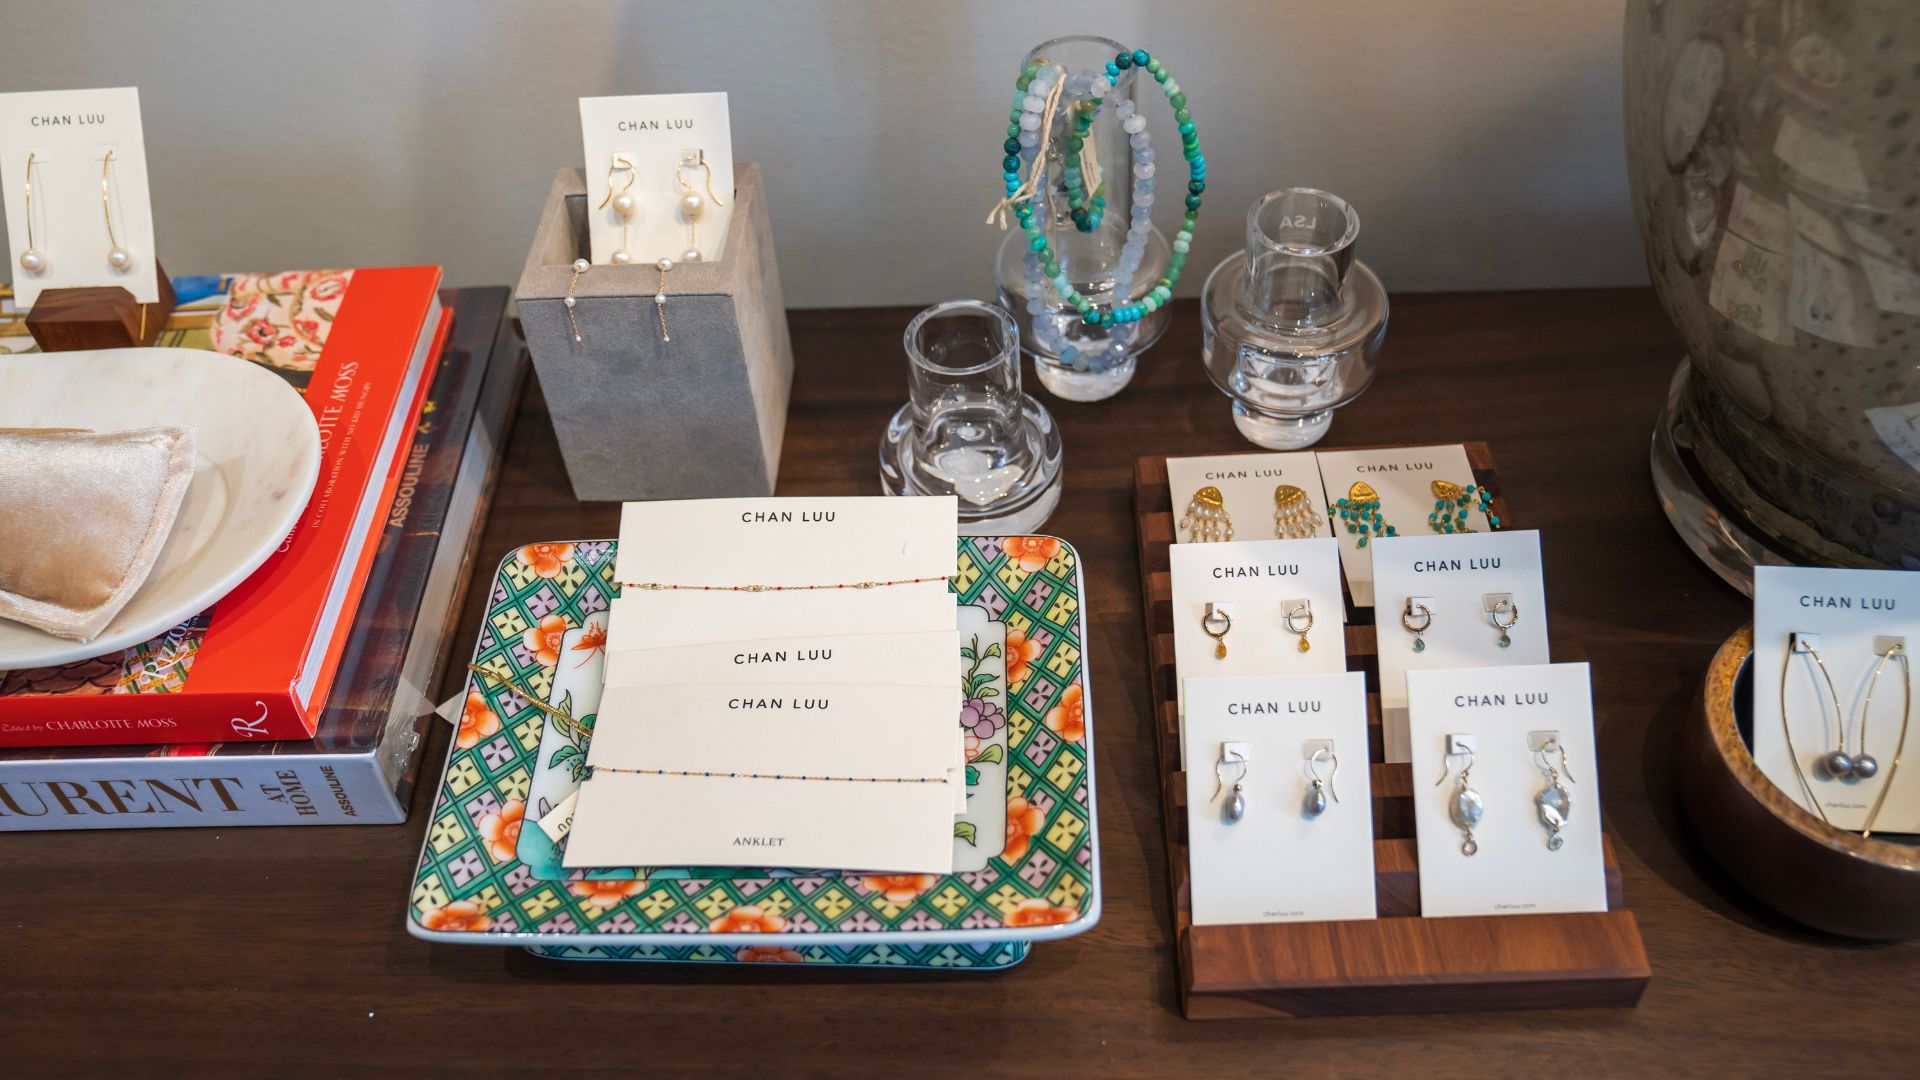 You can shop for jewelry, clothes and more at Hearth & Soul.